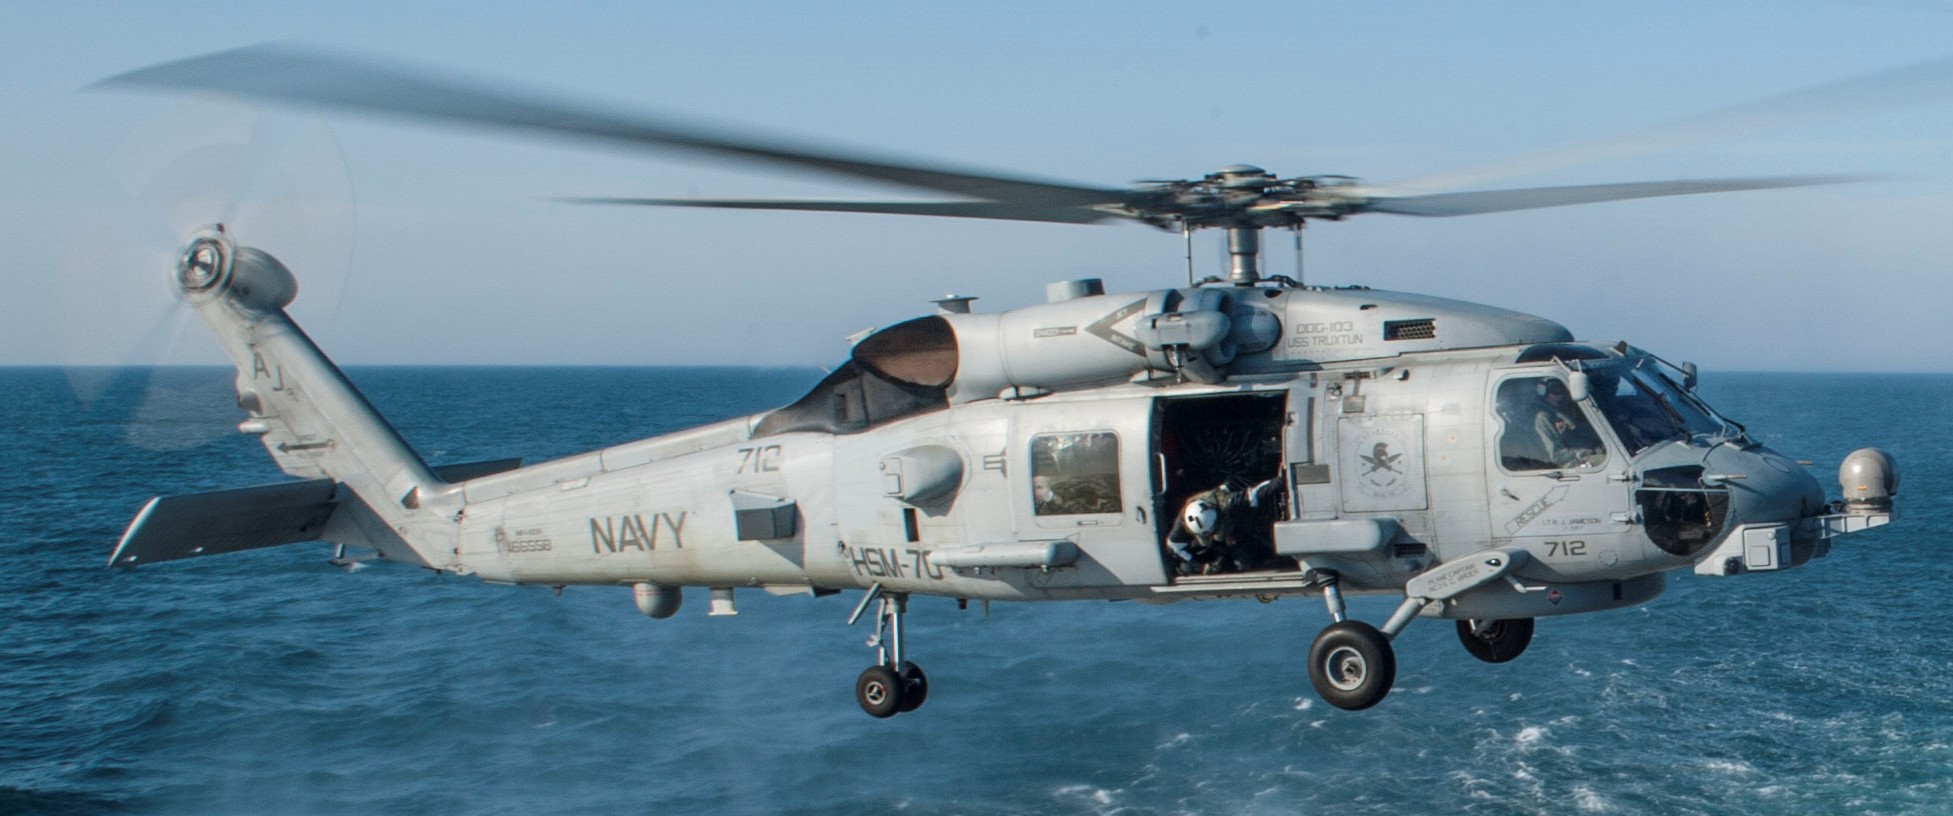 hsm-70 spartans helicopter maritime strike squadron mh-60r seahawk 2014 26